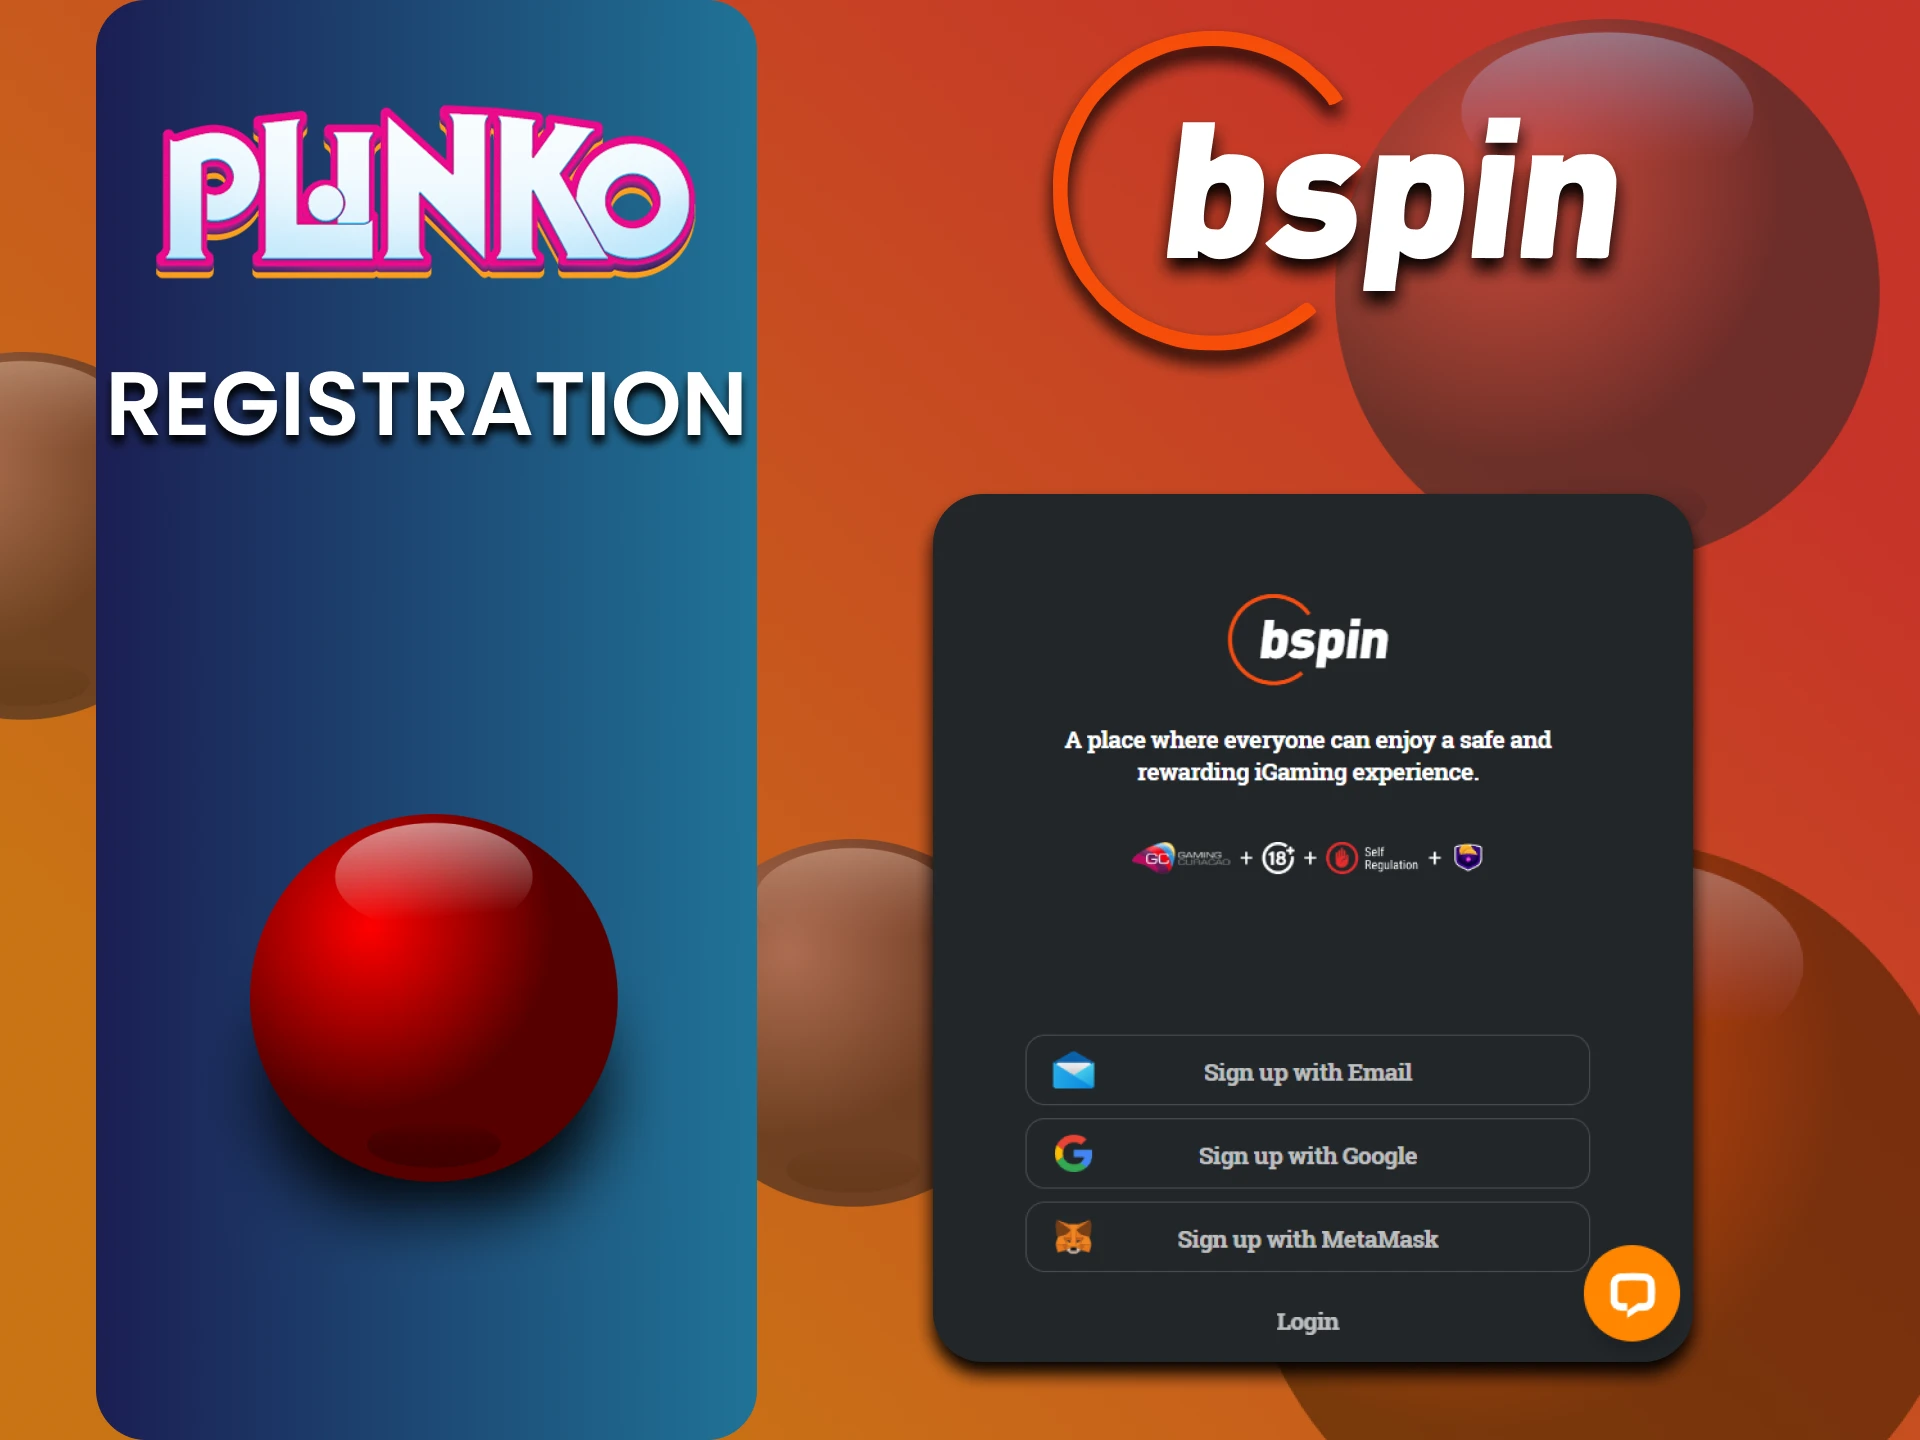 Go through the registration process on Bspin to play Plinko.